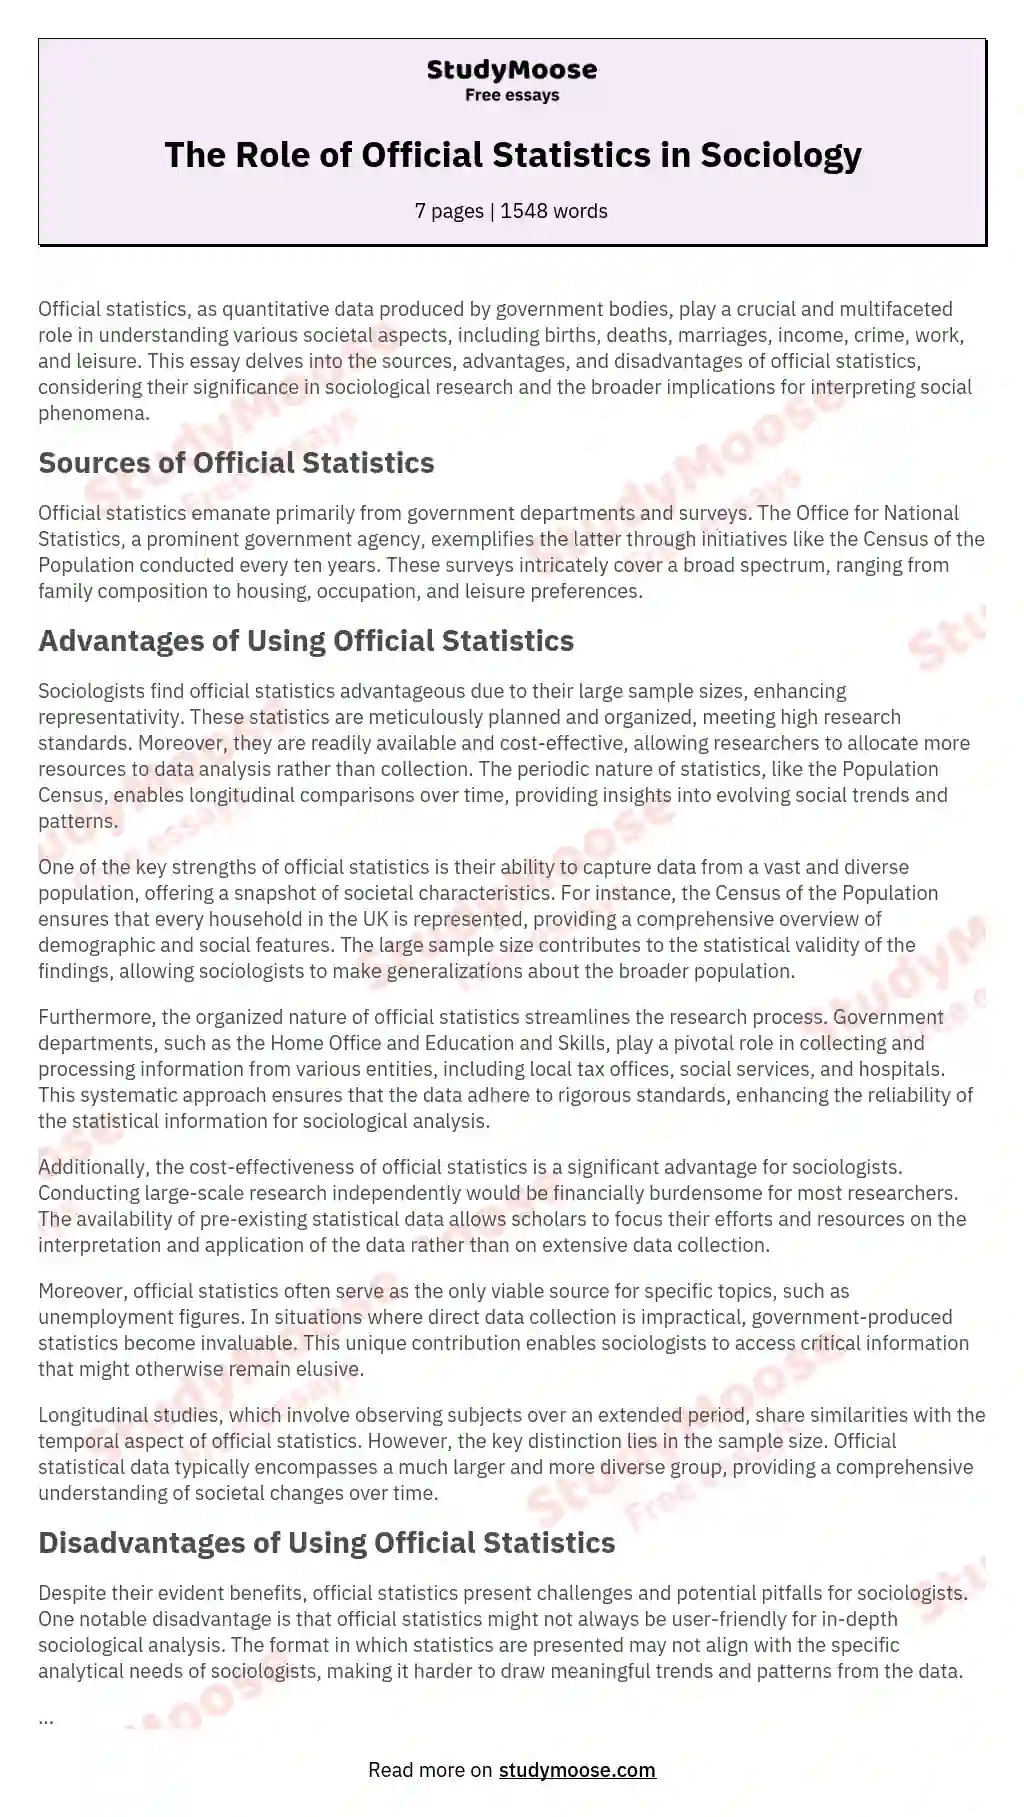 Advantages And Disadvantages Of Official Statistics In Sociological Research Post Preview.webp